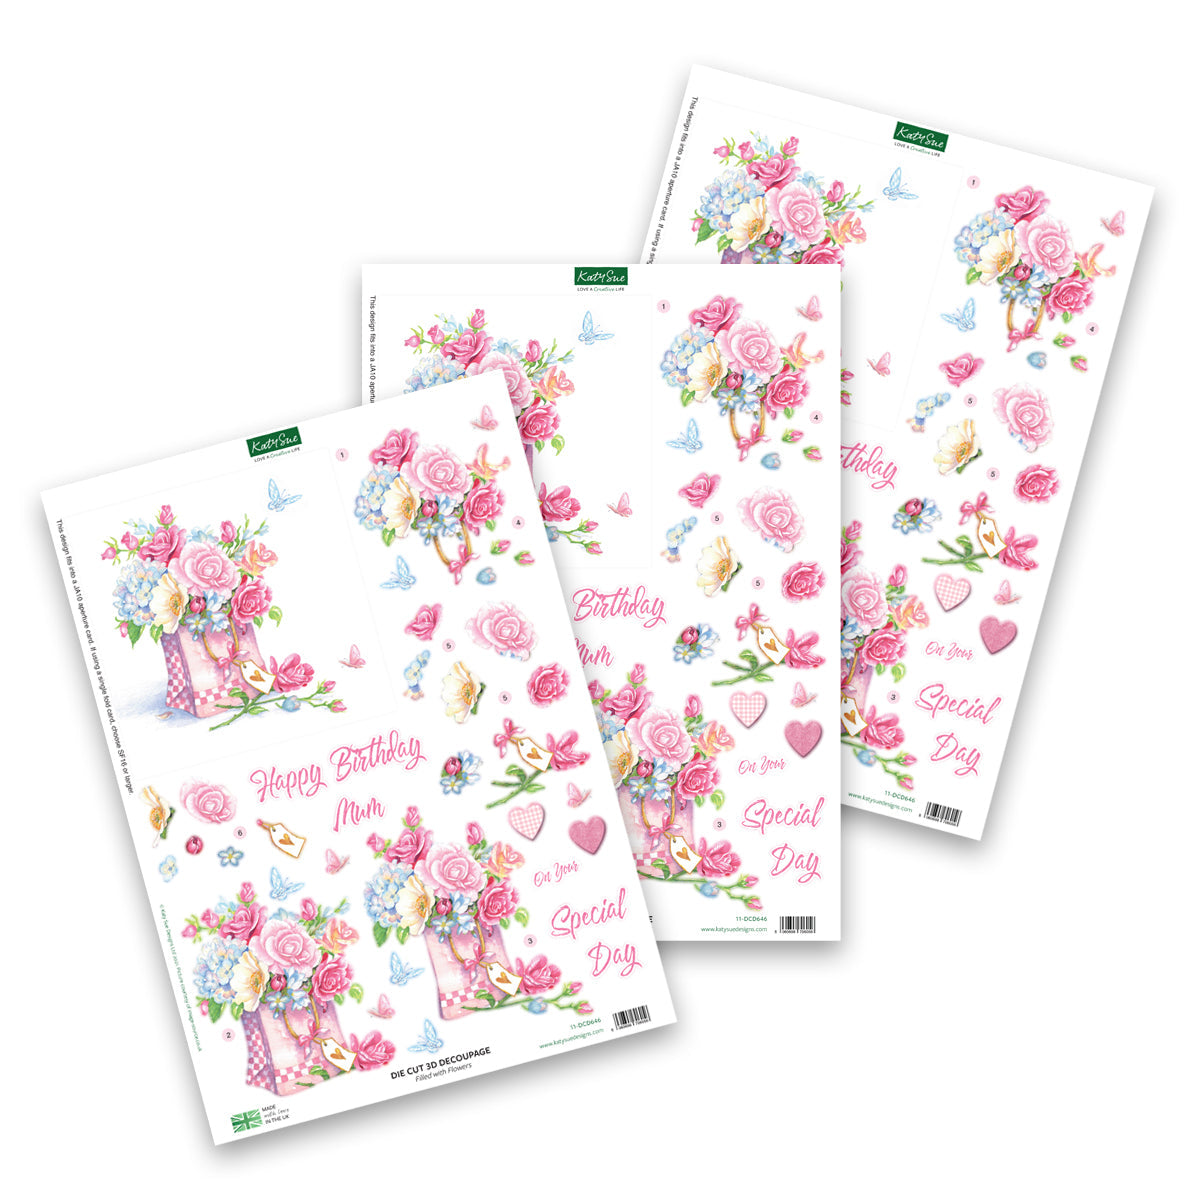 Die Cut Decoupage – Filled With Flowers (Pack Of 3)